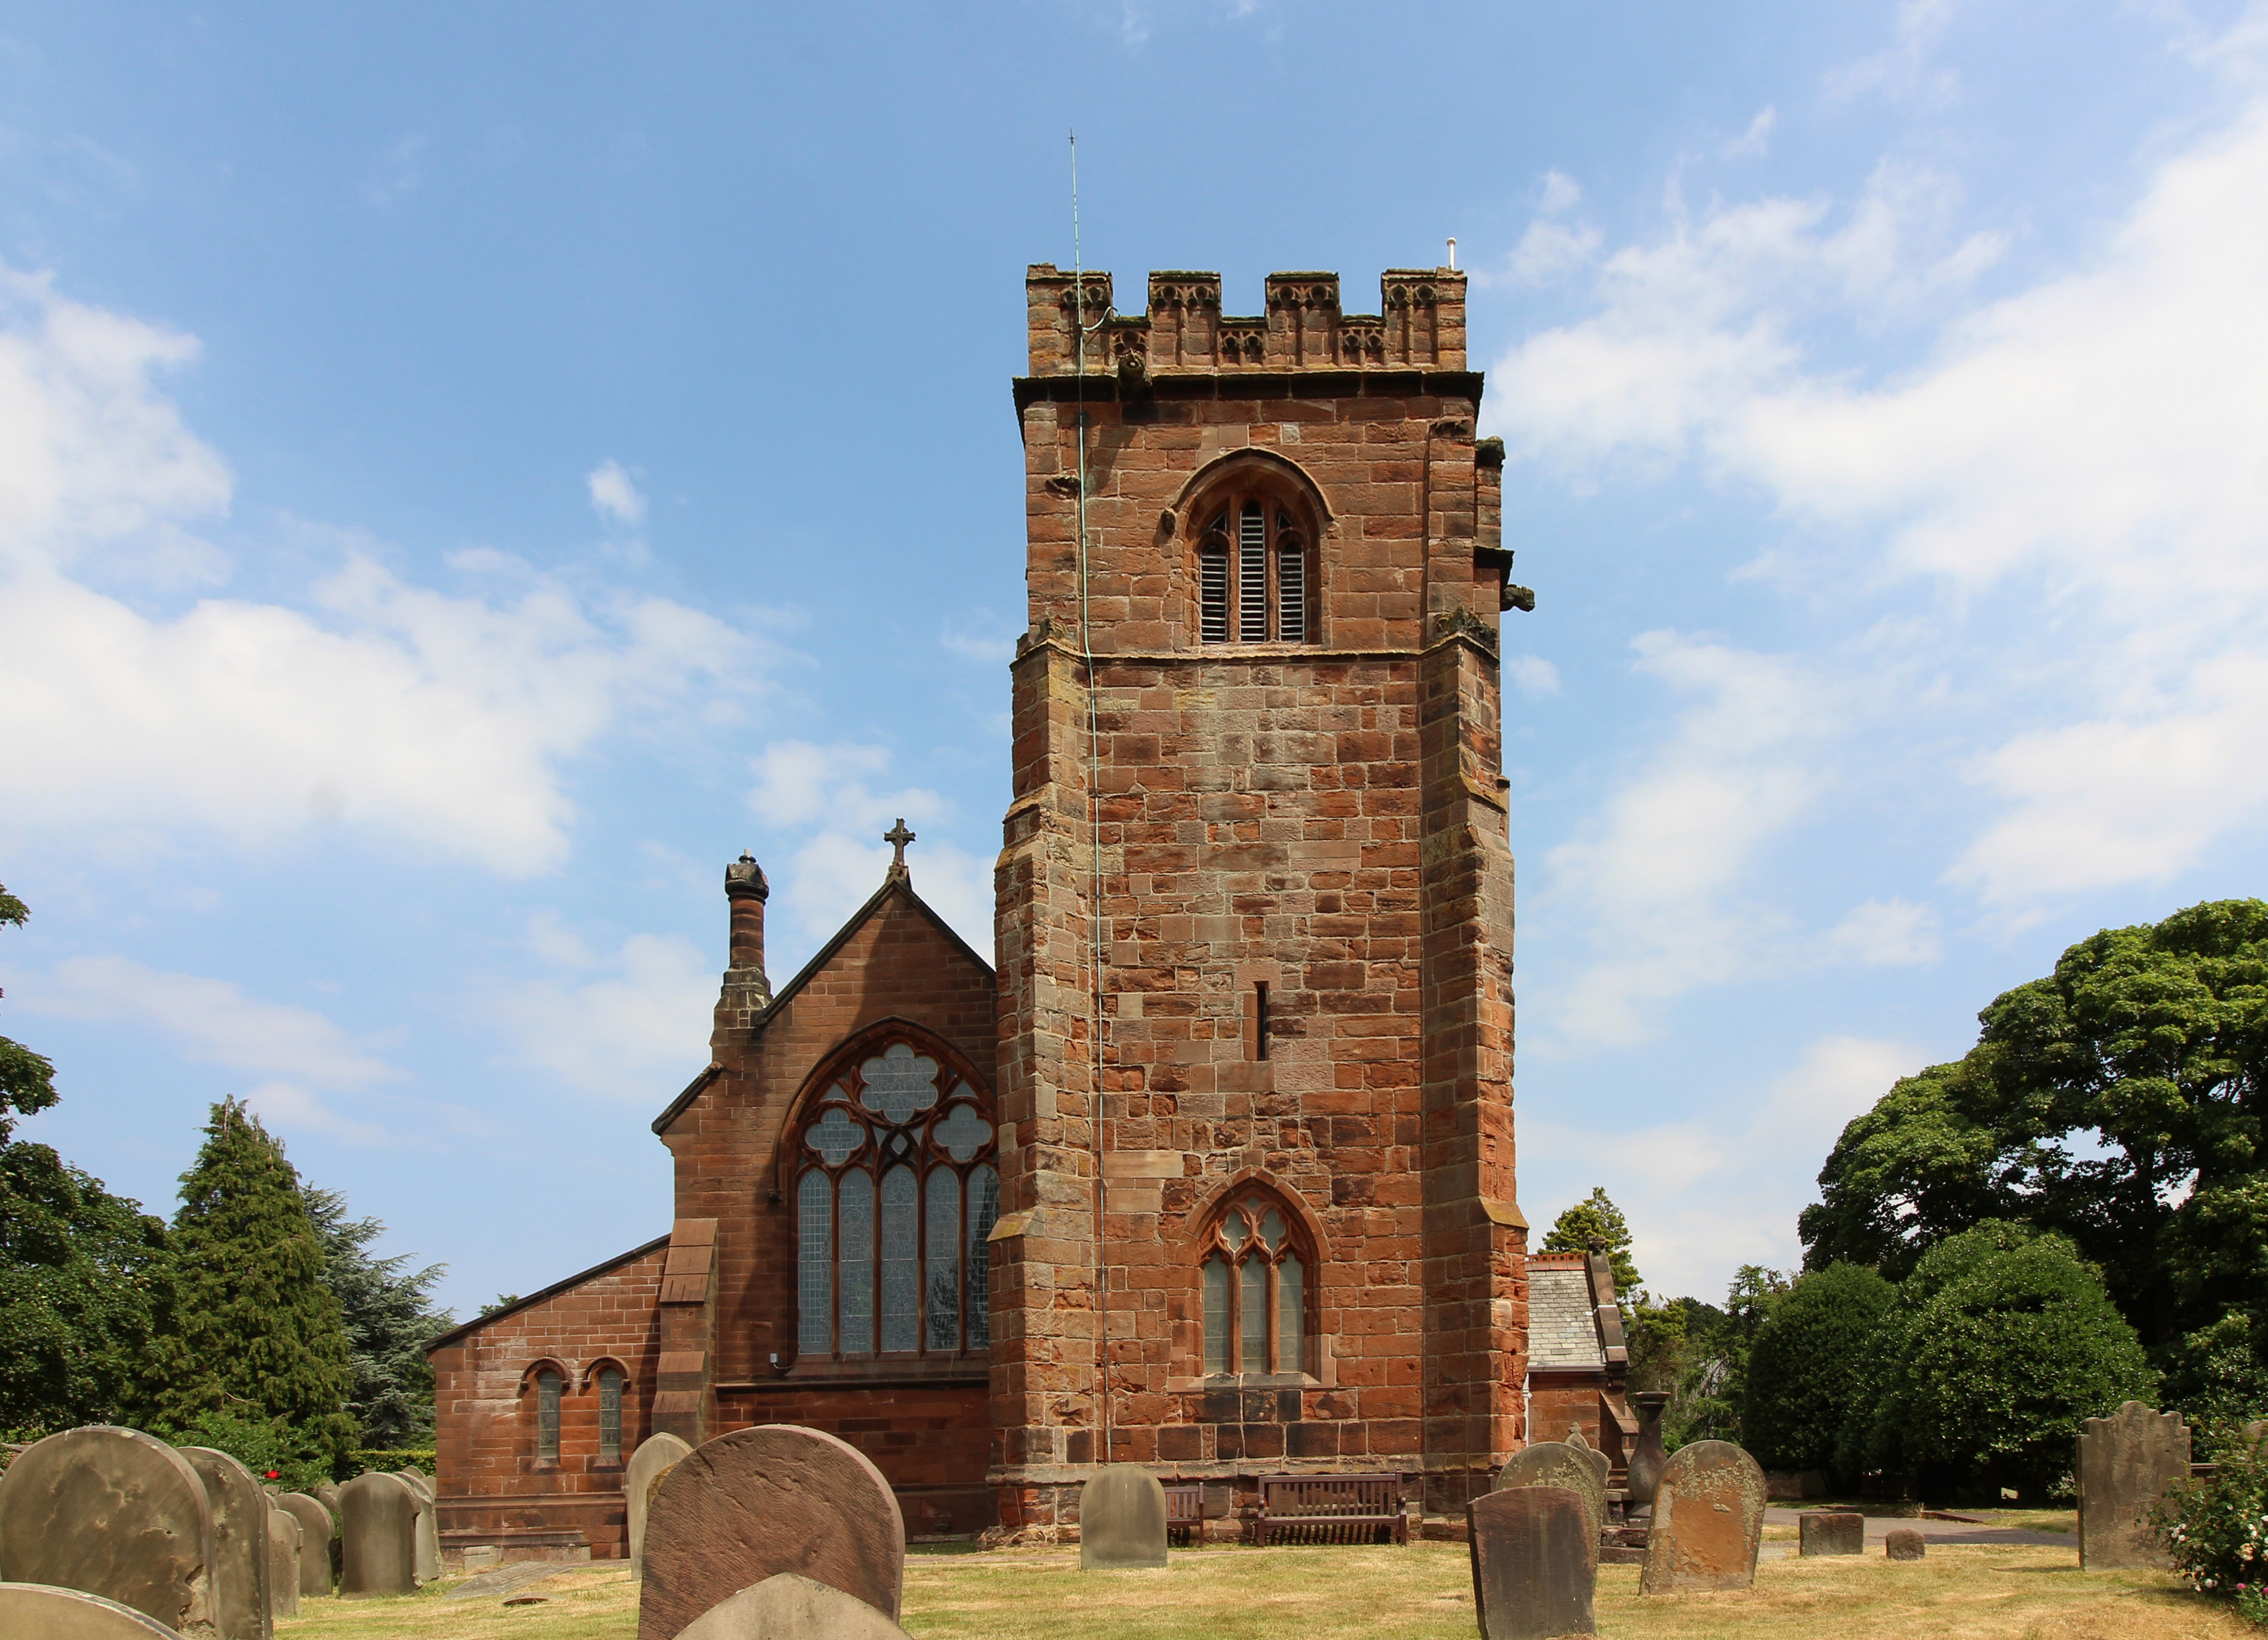 West end and tower of St Peter's church, Heswall